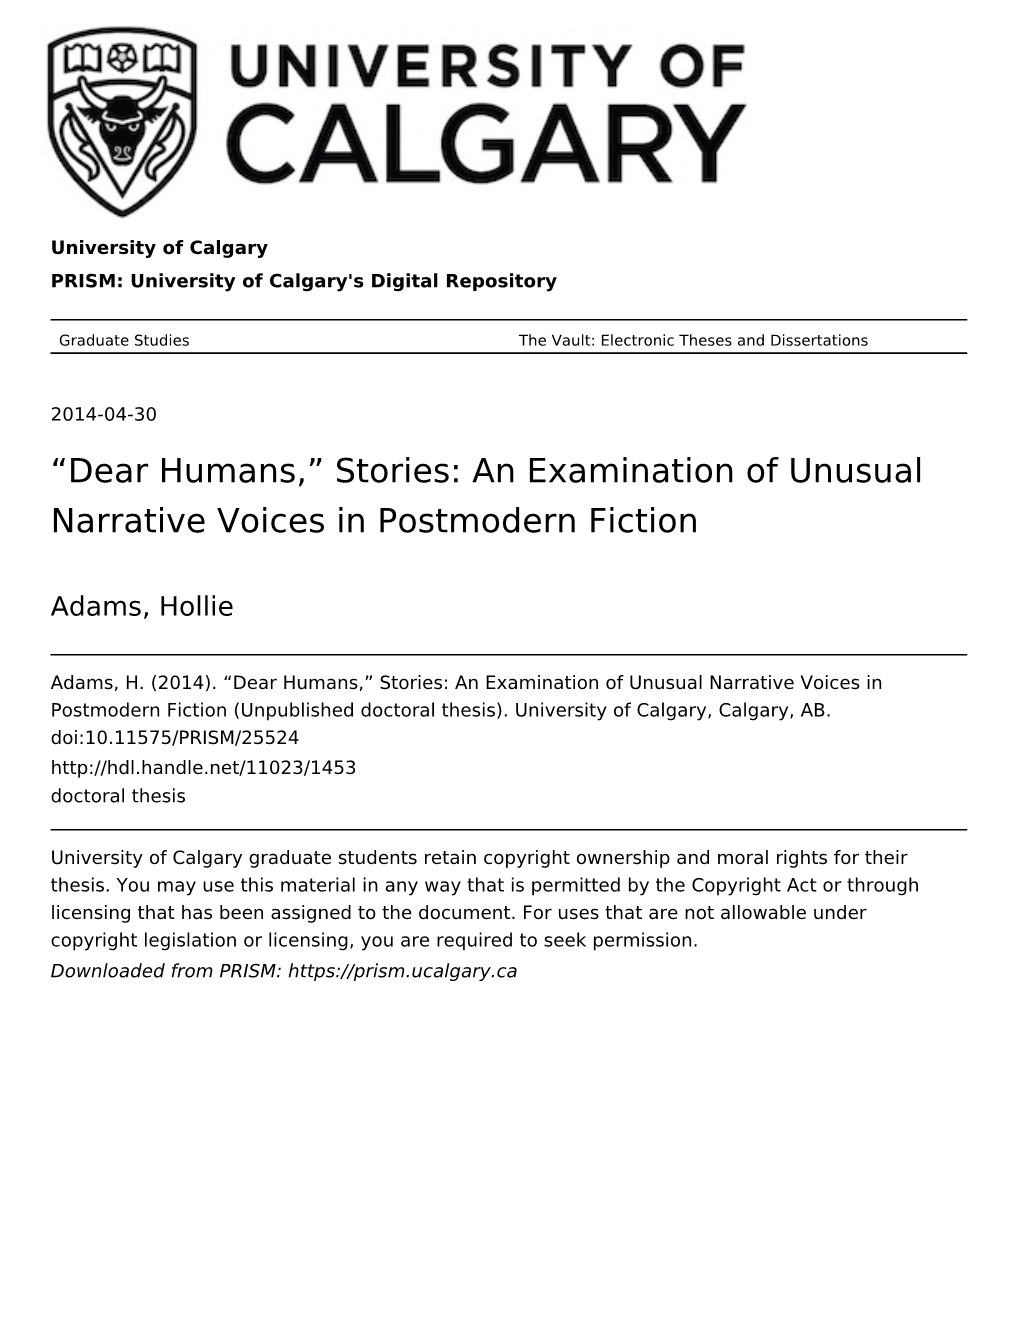 “Dear Humans,” Stories: an Examination of Unusual Narrative Voices in Postmodern Fiction